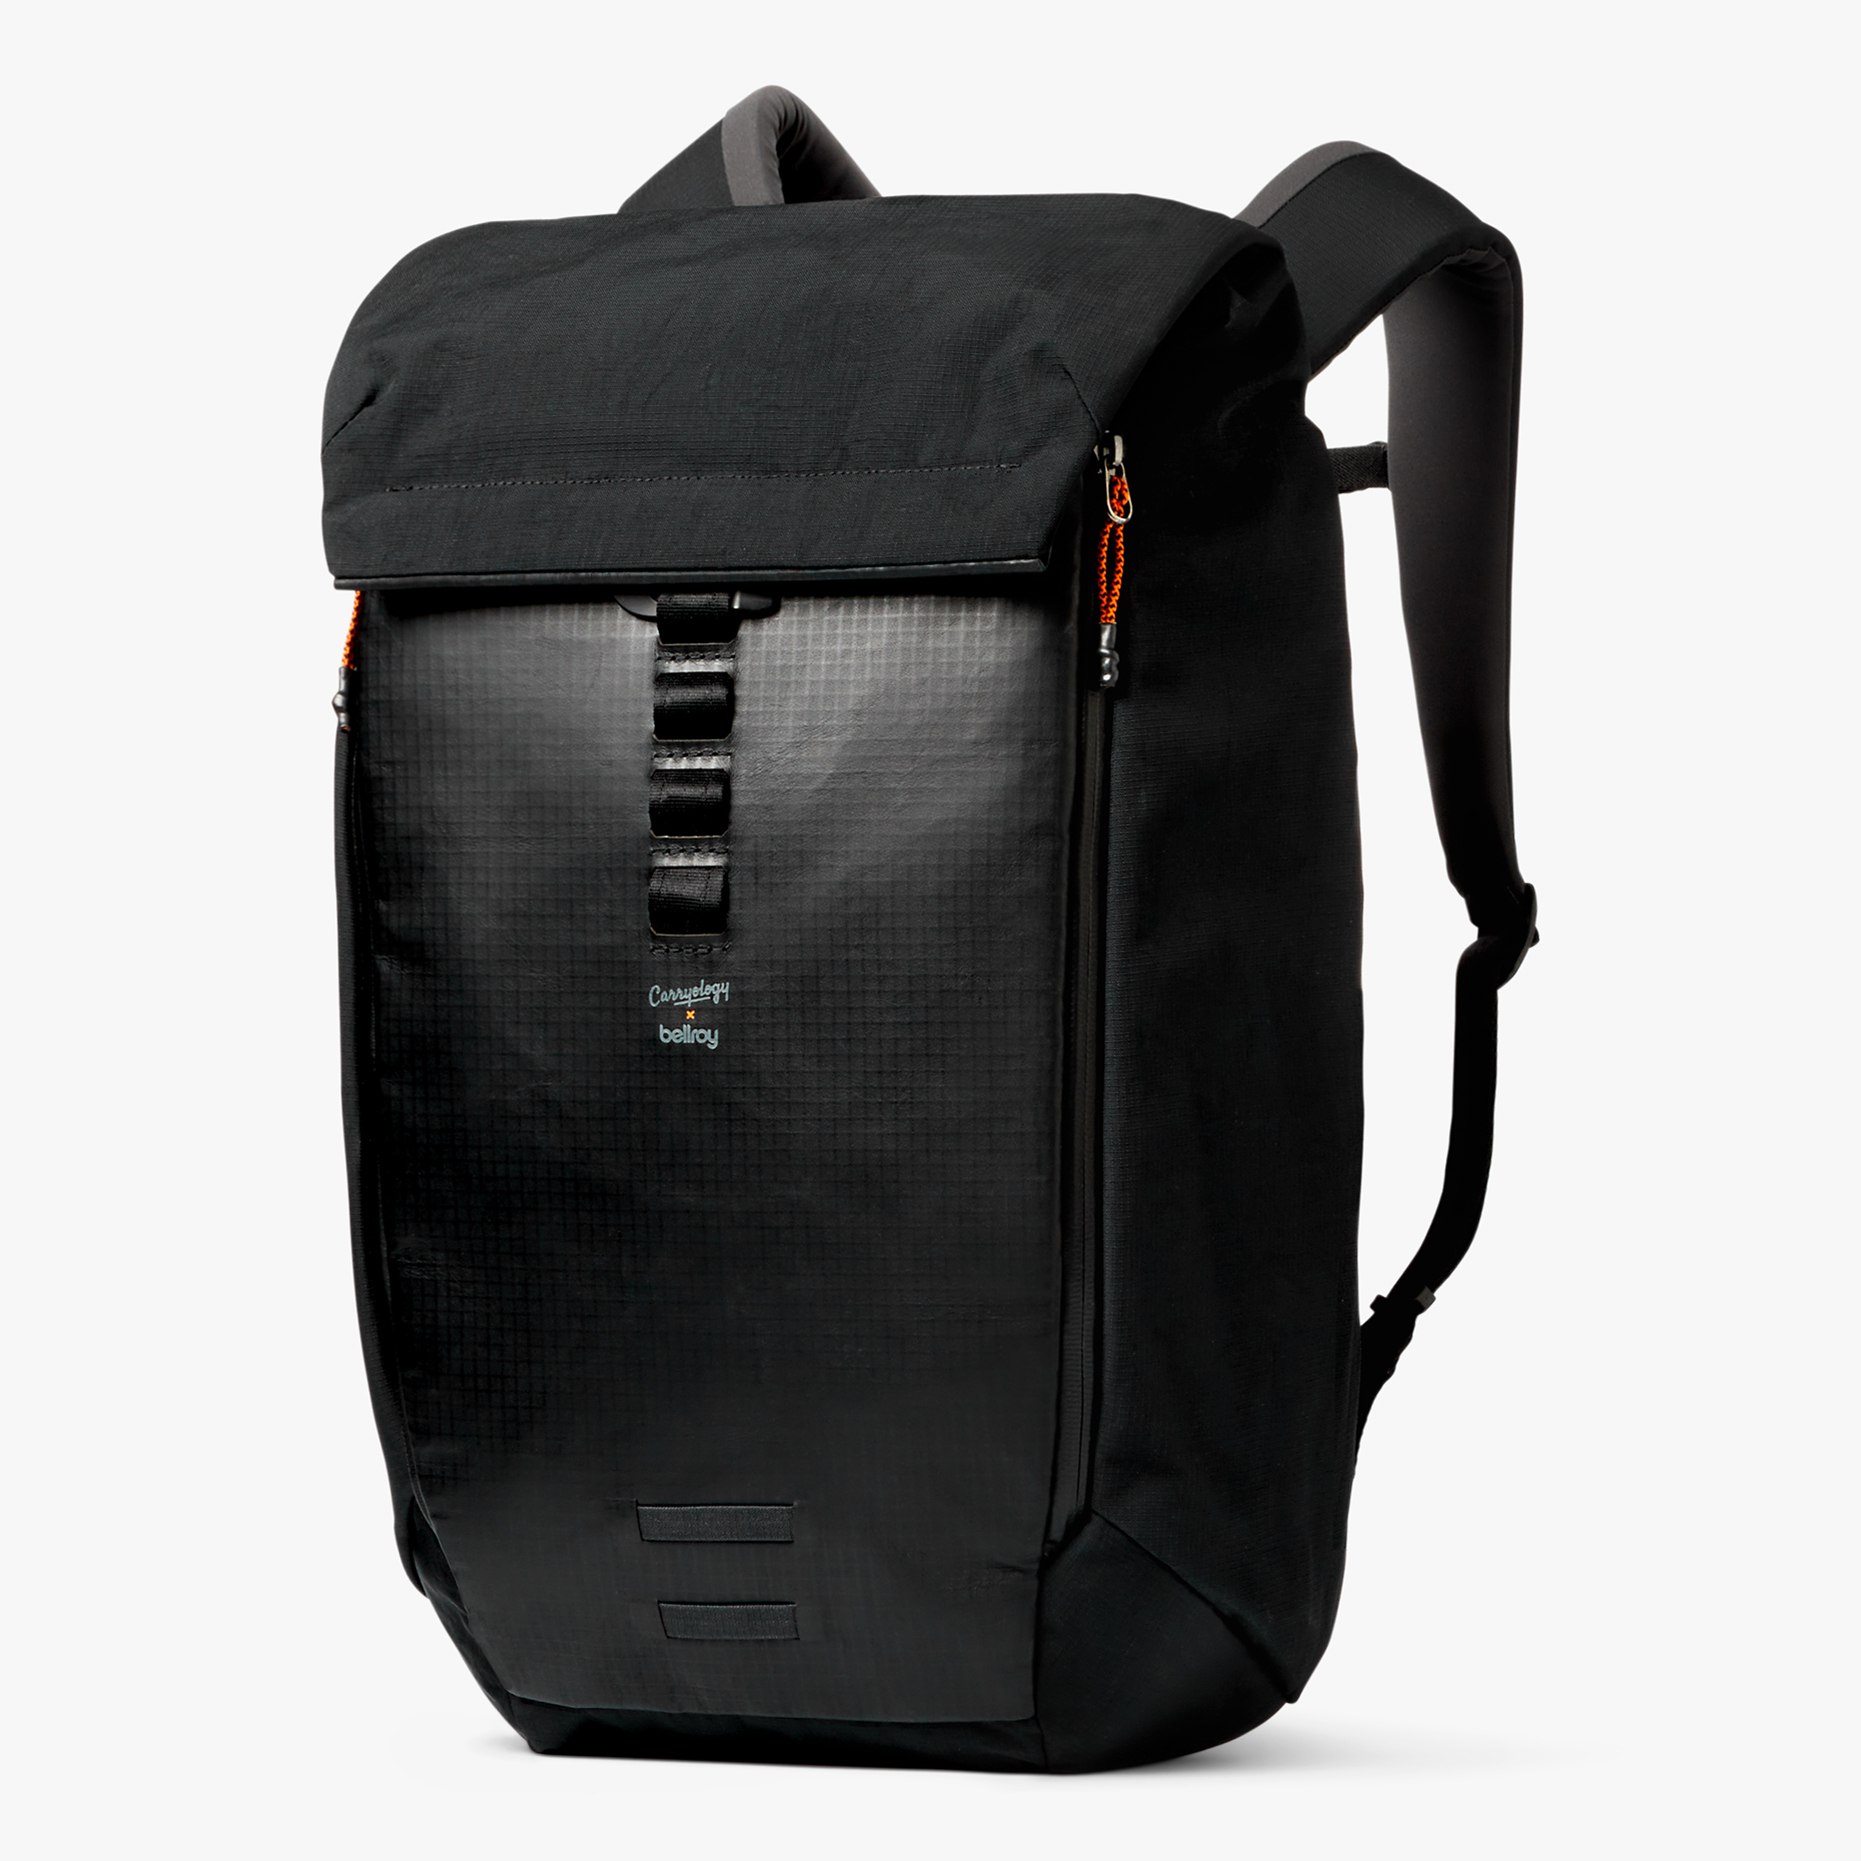 Bellroy x Carryology - Chimera Backpack